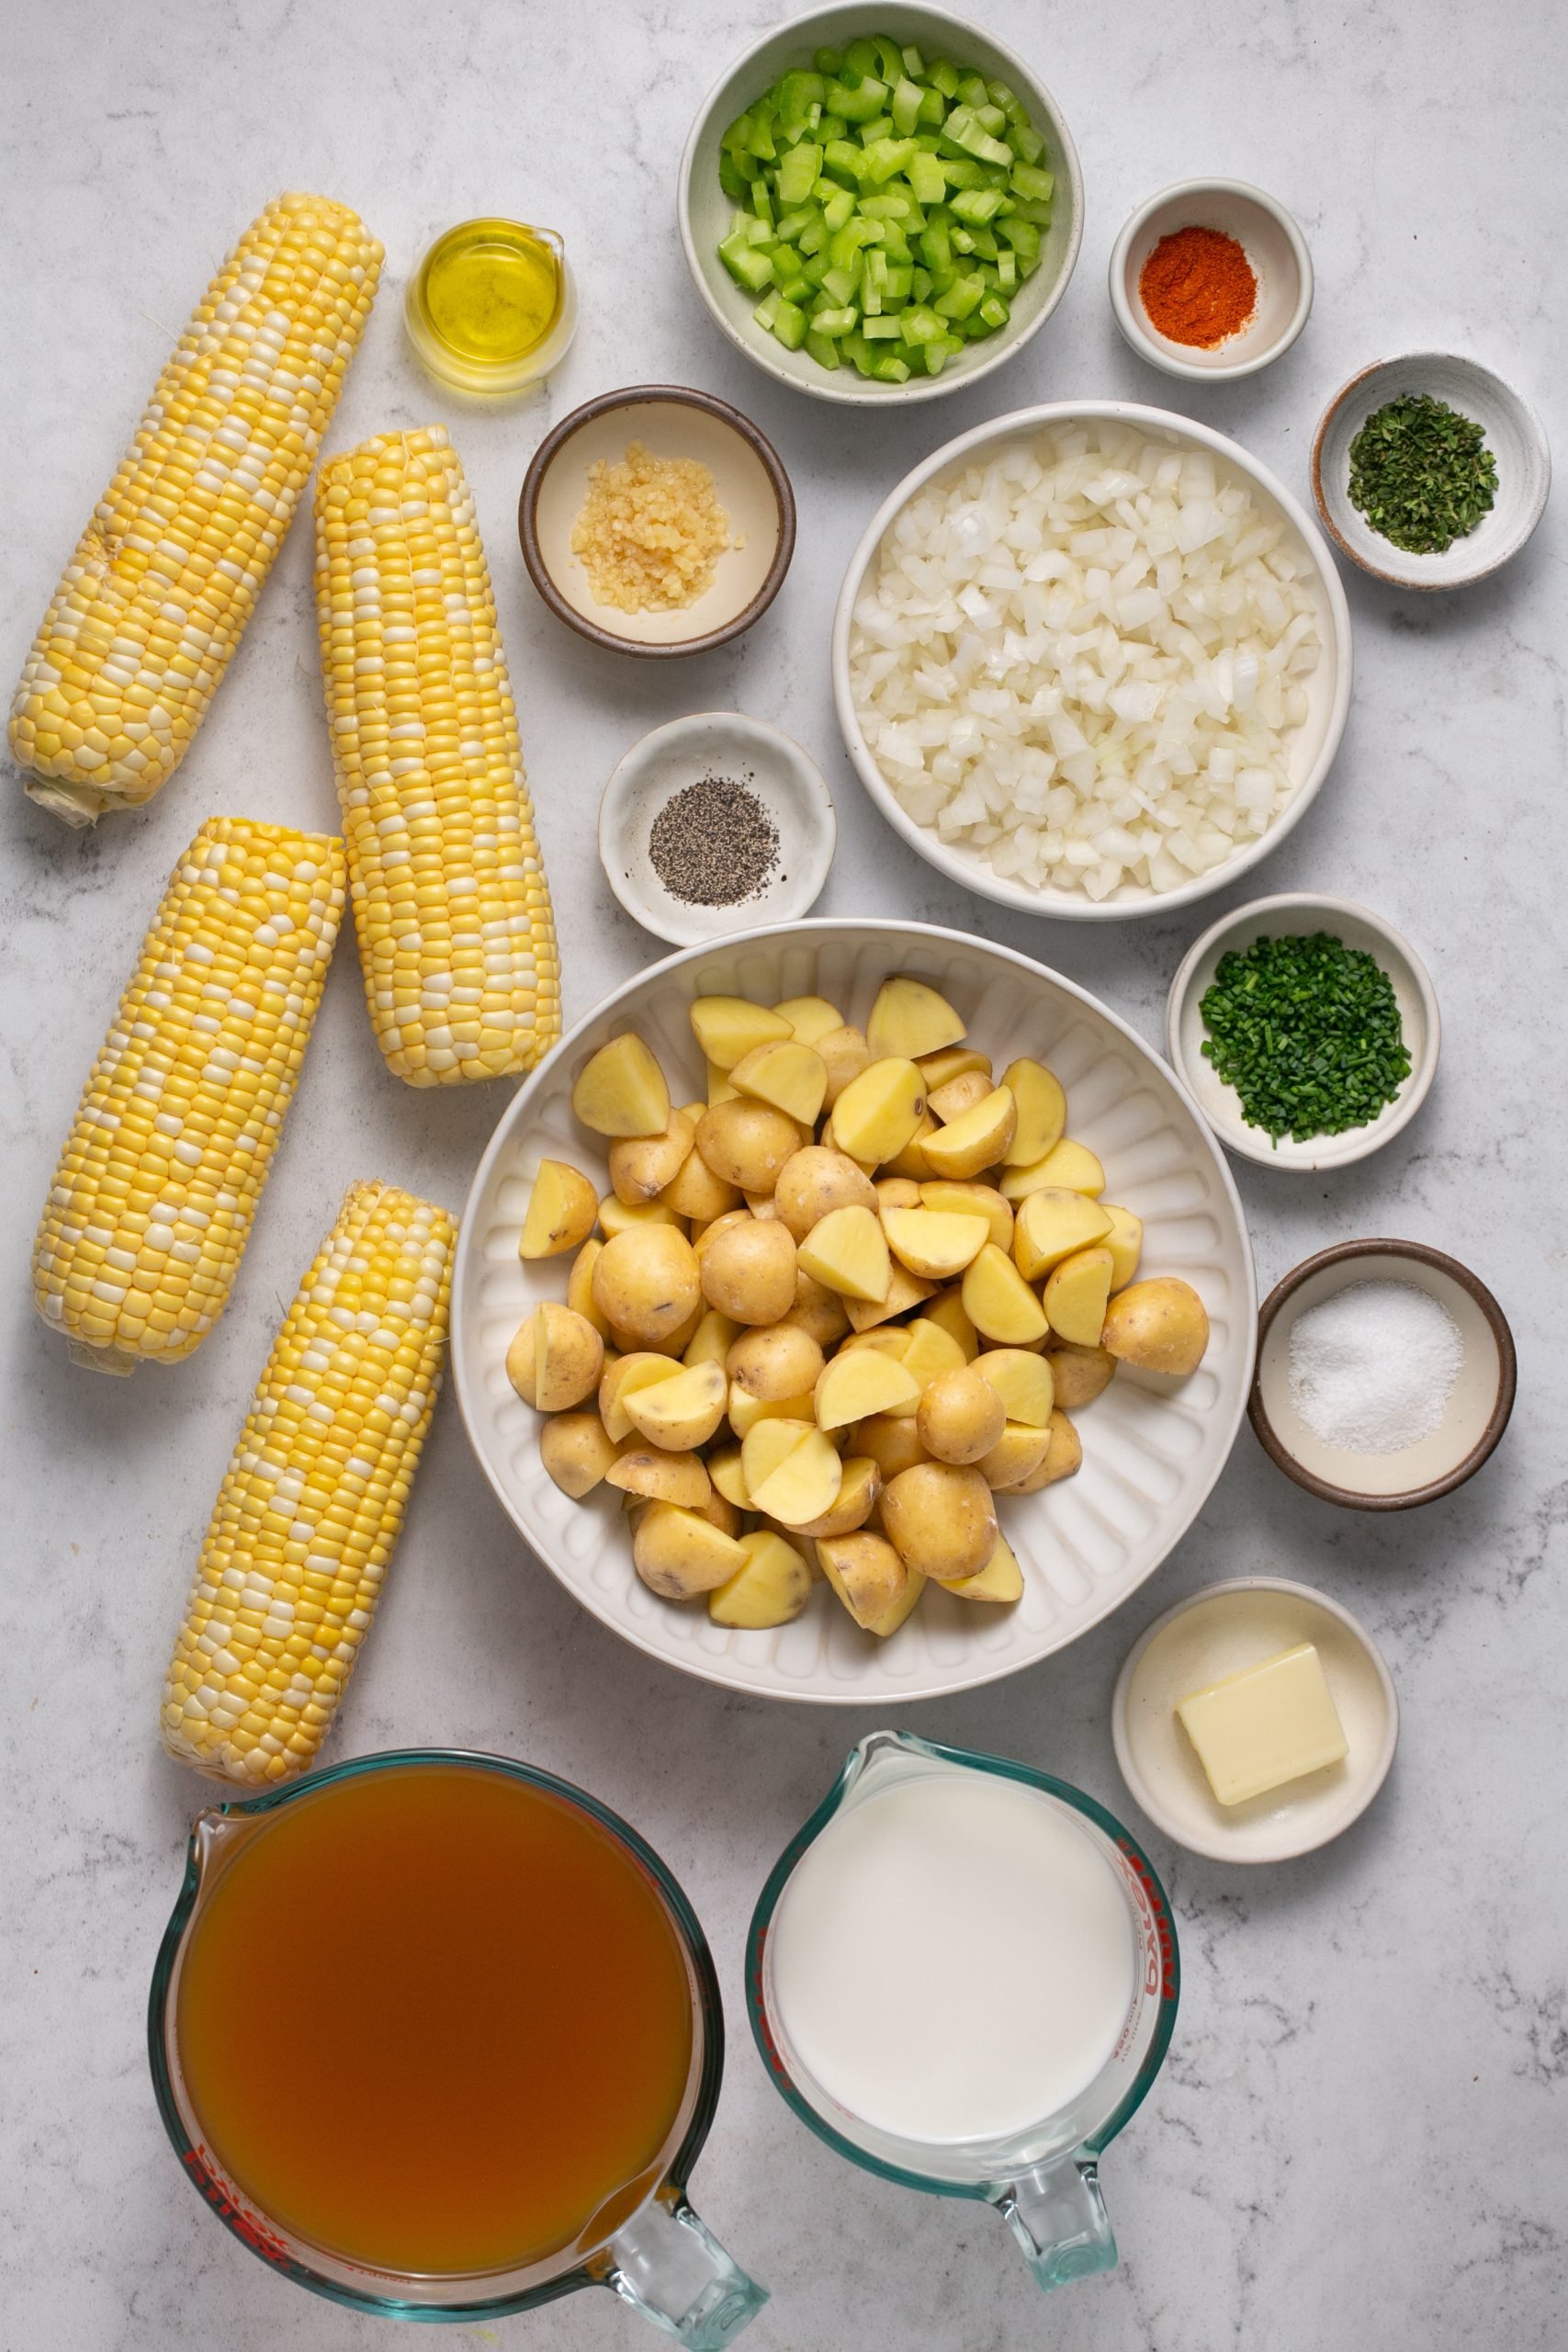 Ingredients for corn and potato chowder in a table in bowls and measuring cups.